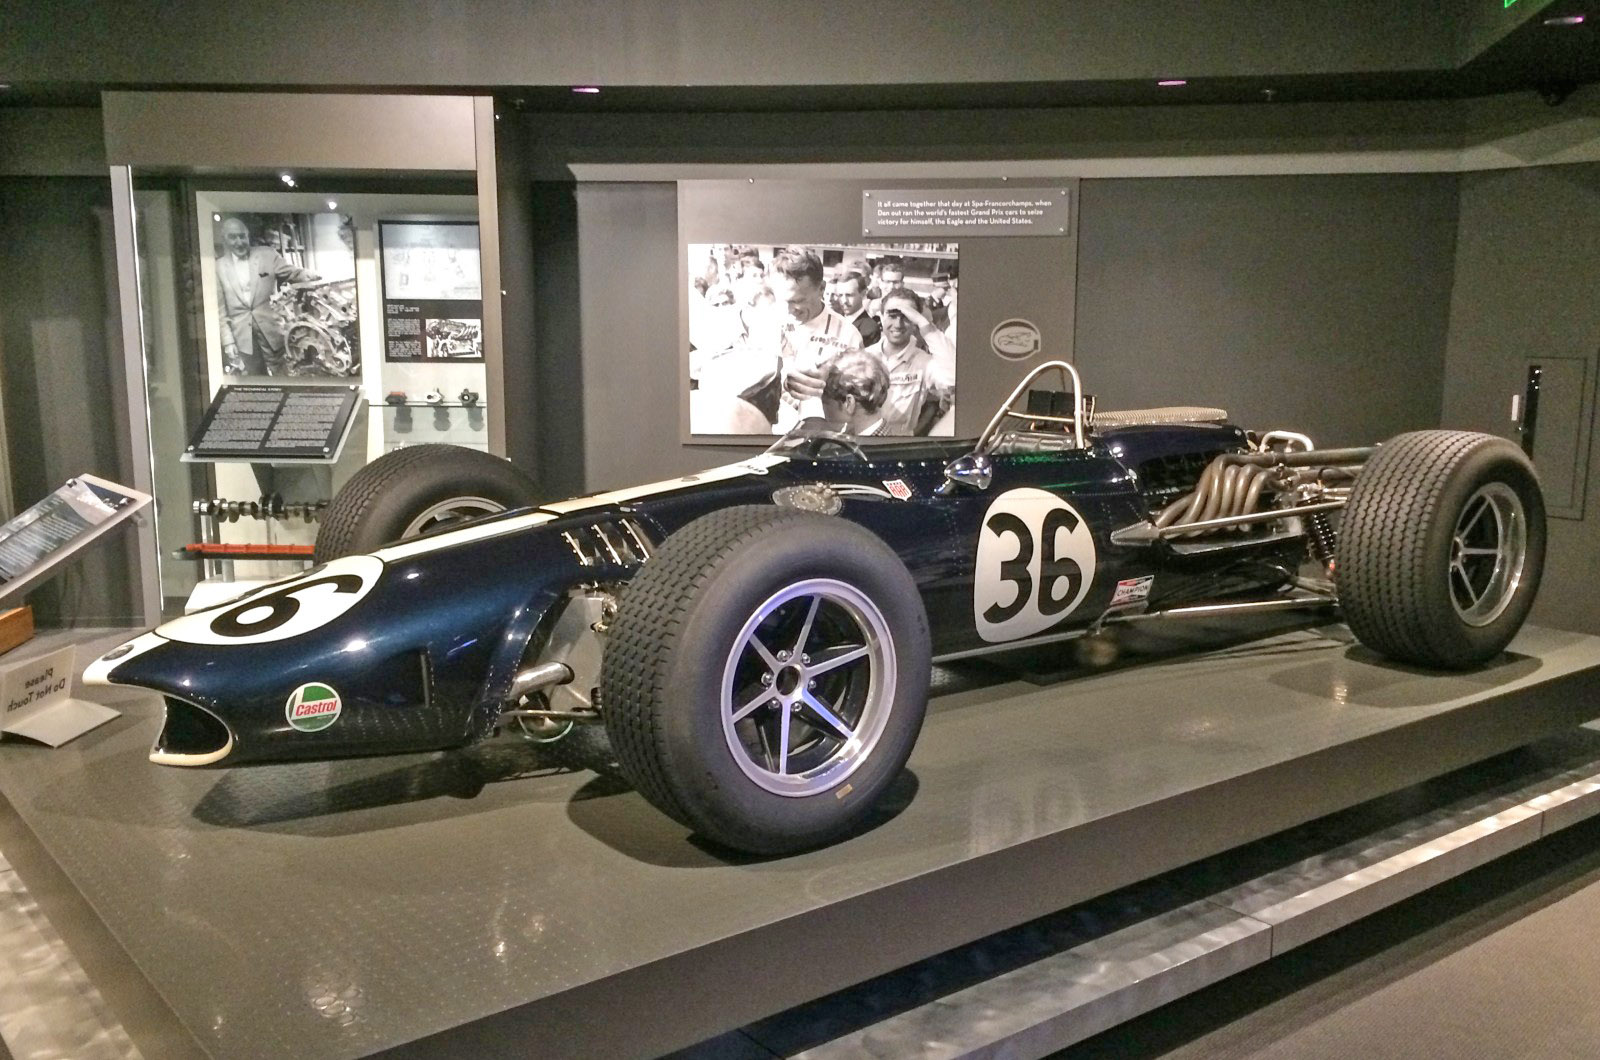 <p>Also known as the T1G, the Eagle Mk1 was a Formula One racing car designed by Len Terry for Dan Gurney’s Anglo-American Racers team in 1966. It is considered to be one of the most beautiful Grand Prix cars ever raced.</p><p>Dan Gurney won the 1967 Belgian Grand Prix behind the wheel of the Eagle Mk1, marking the first win for an American constructor in a Grand Prix race since 1921. Gurney is also one of only three drivers to win a Formula One Grand Prix in a car of their own construction.</p>